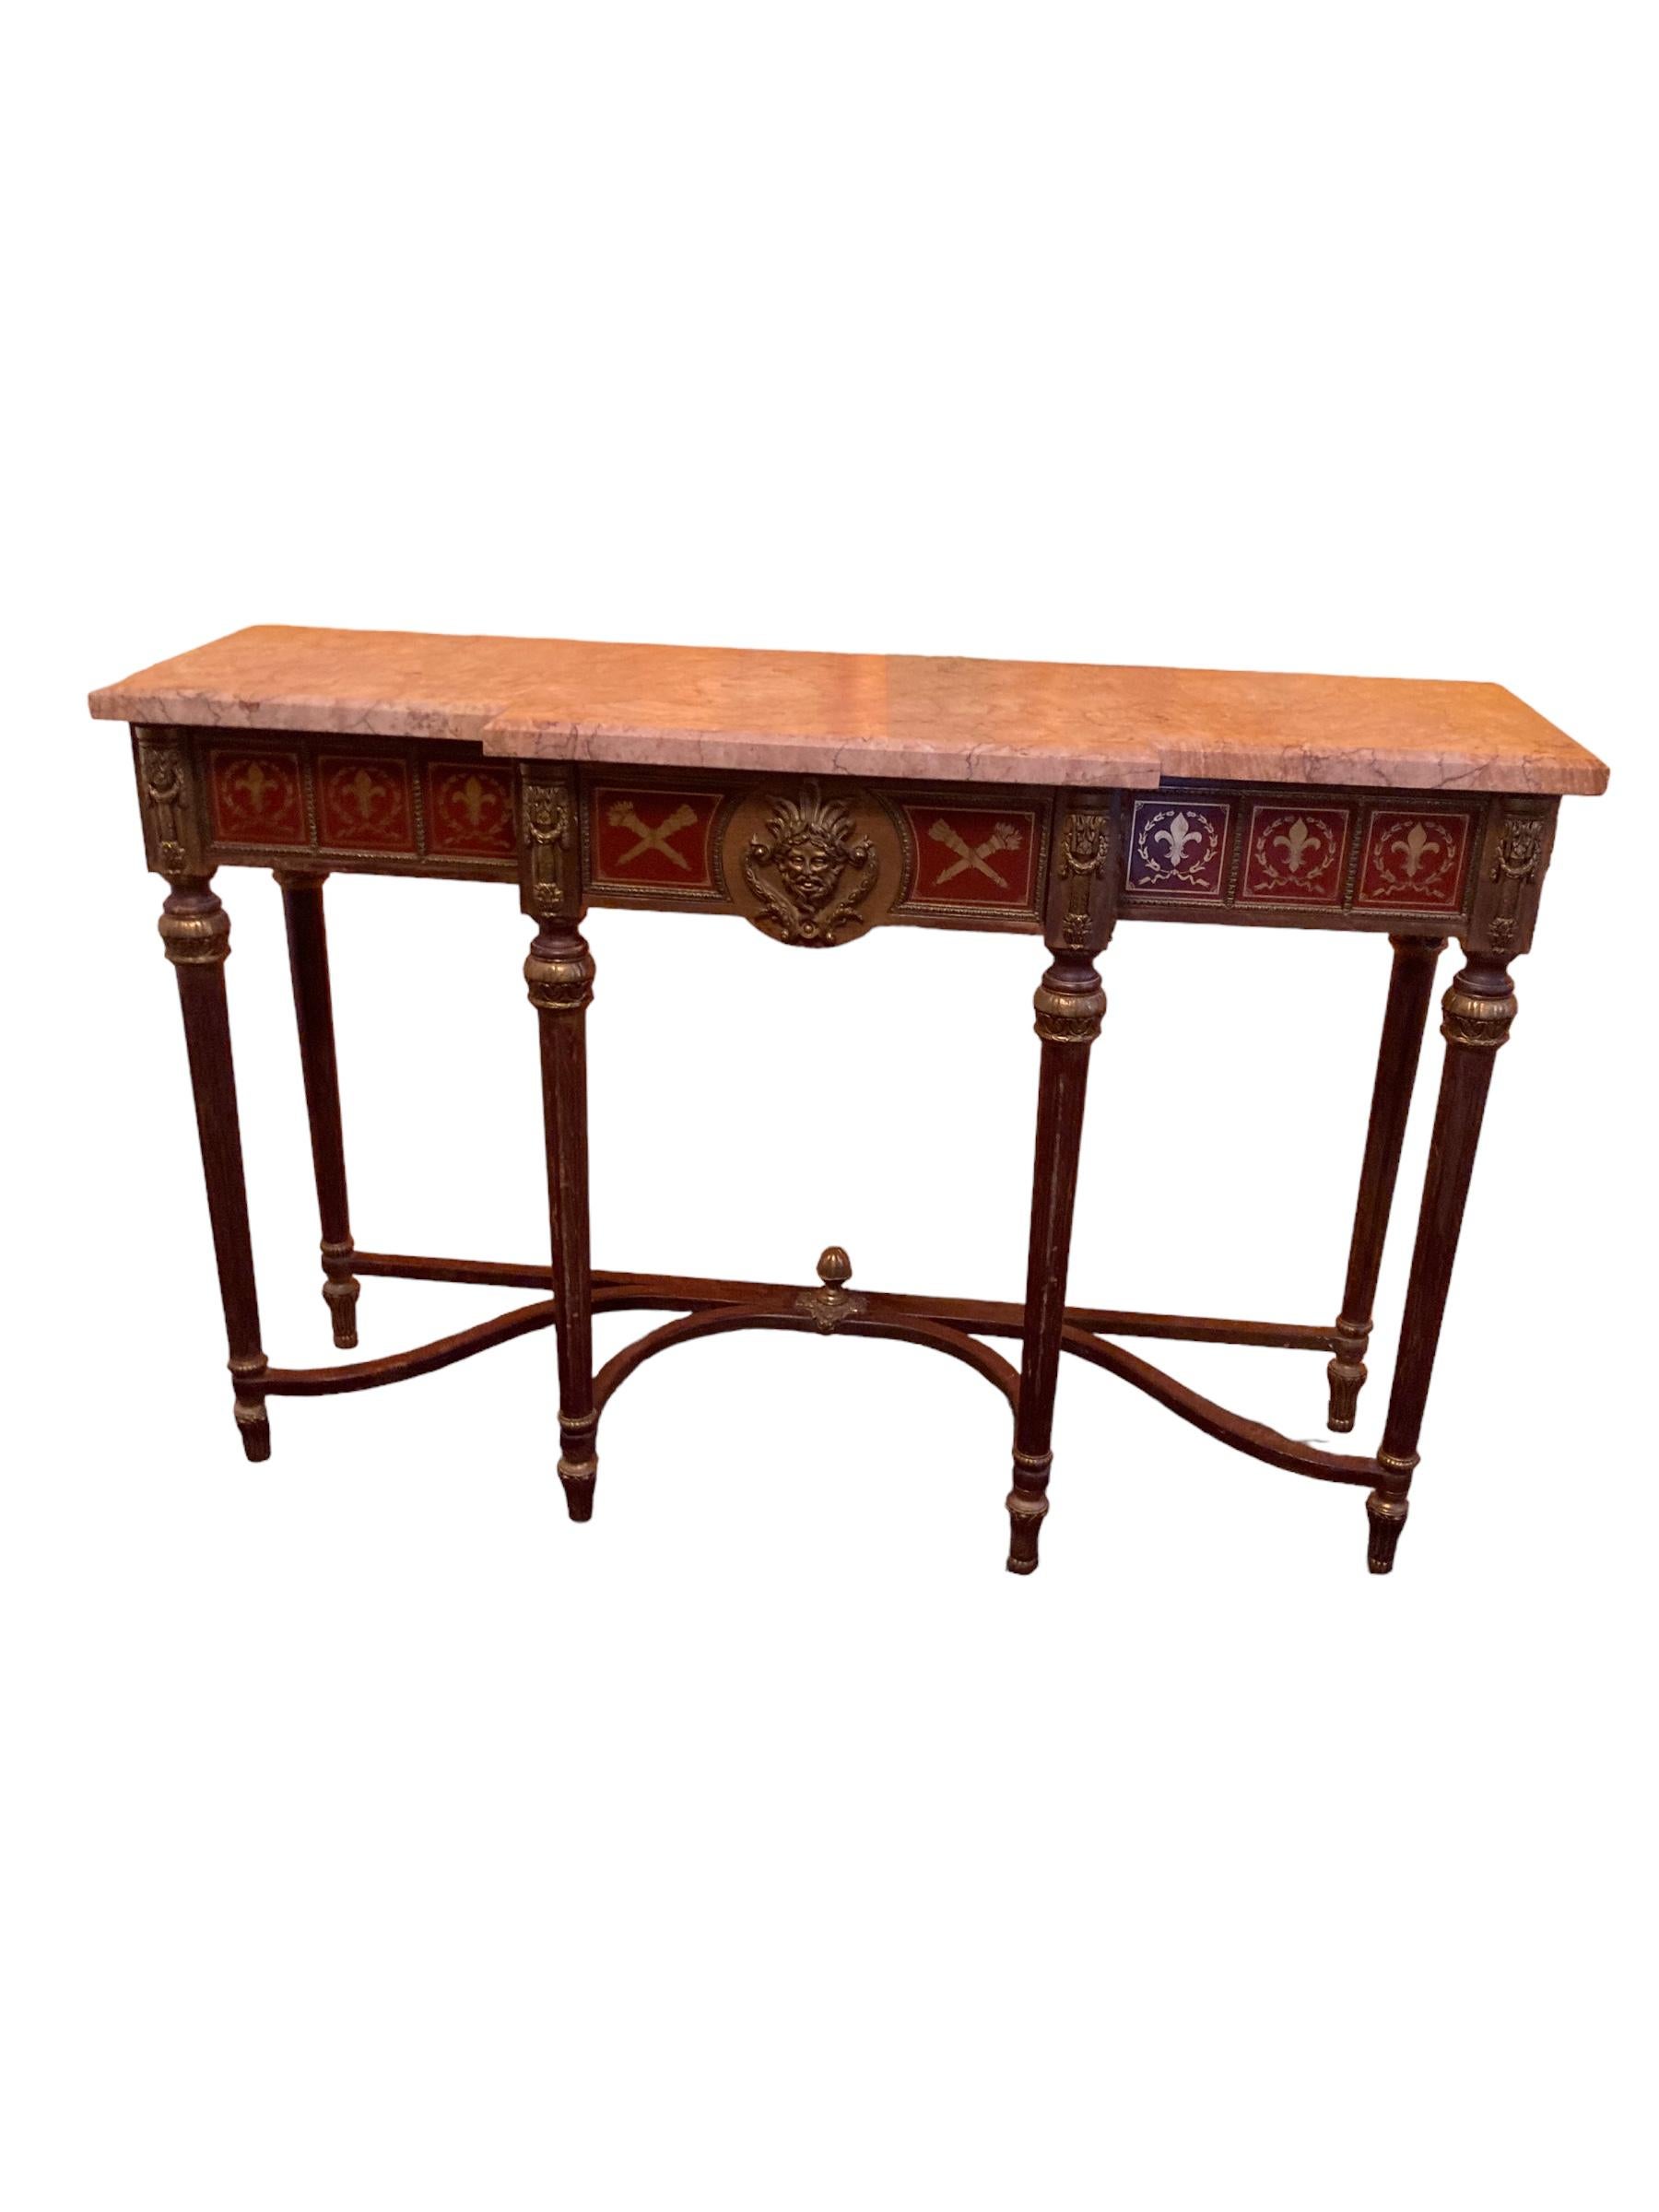 French Louis XVI Revival Style Console Table by H & L Epstein